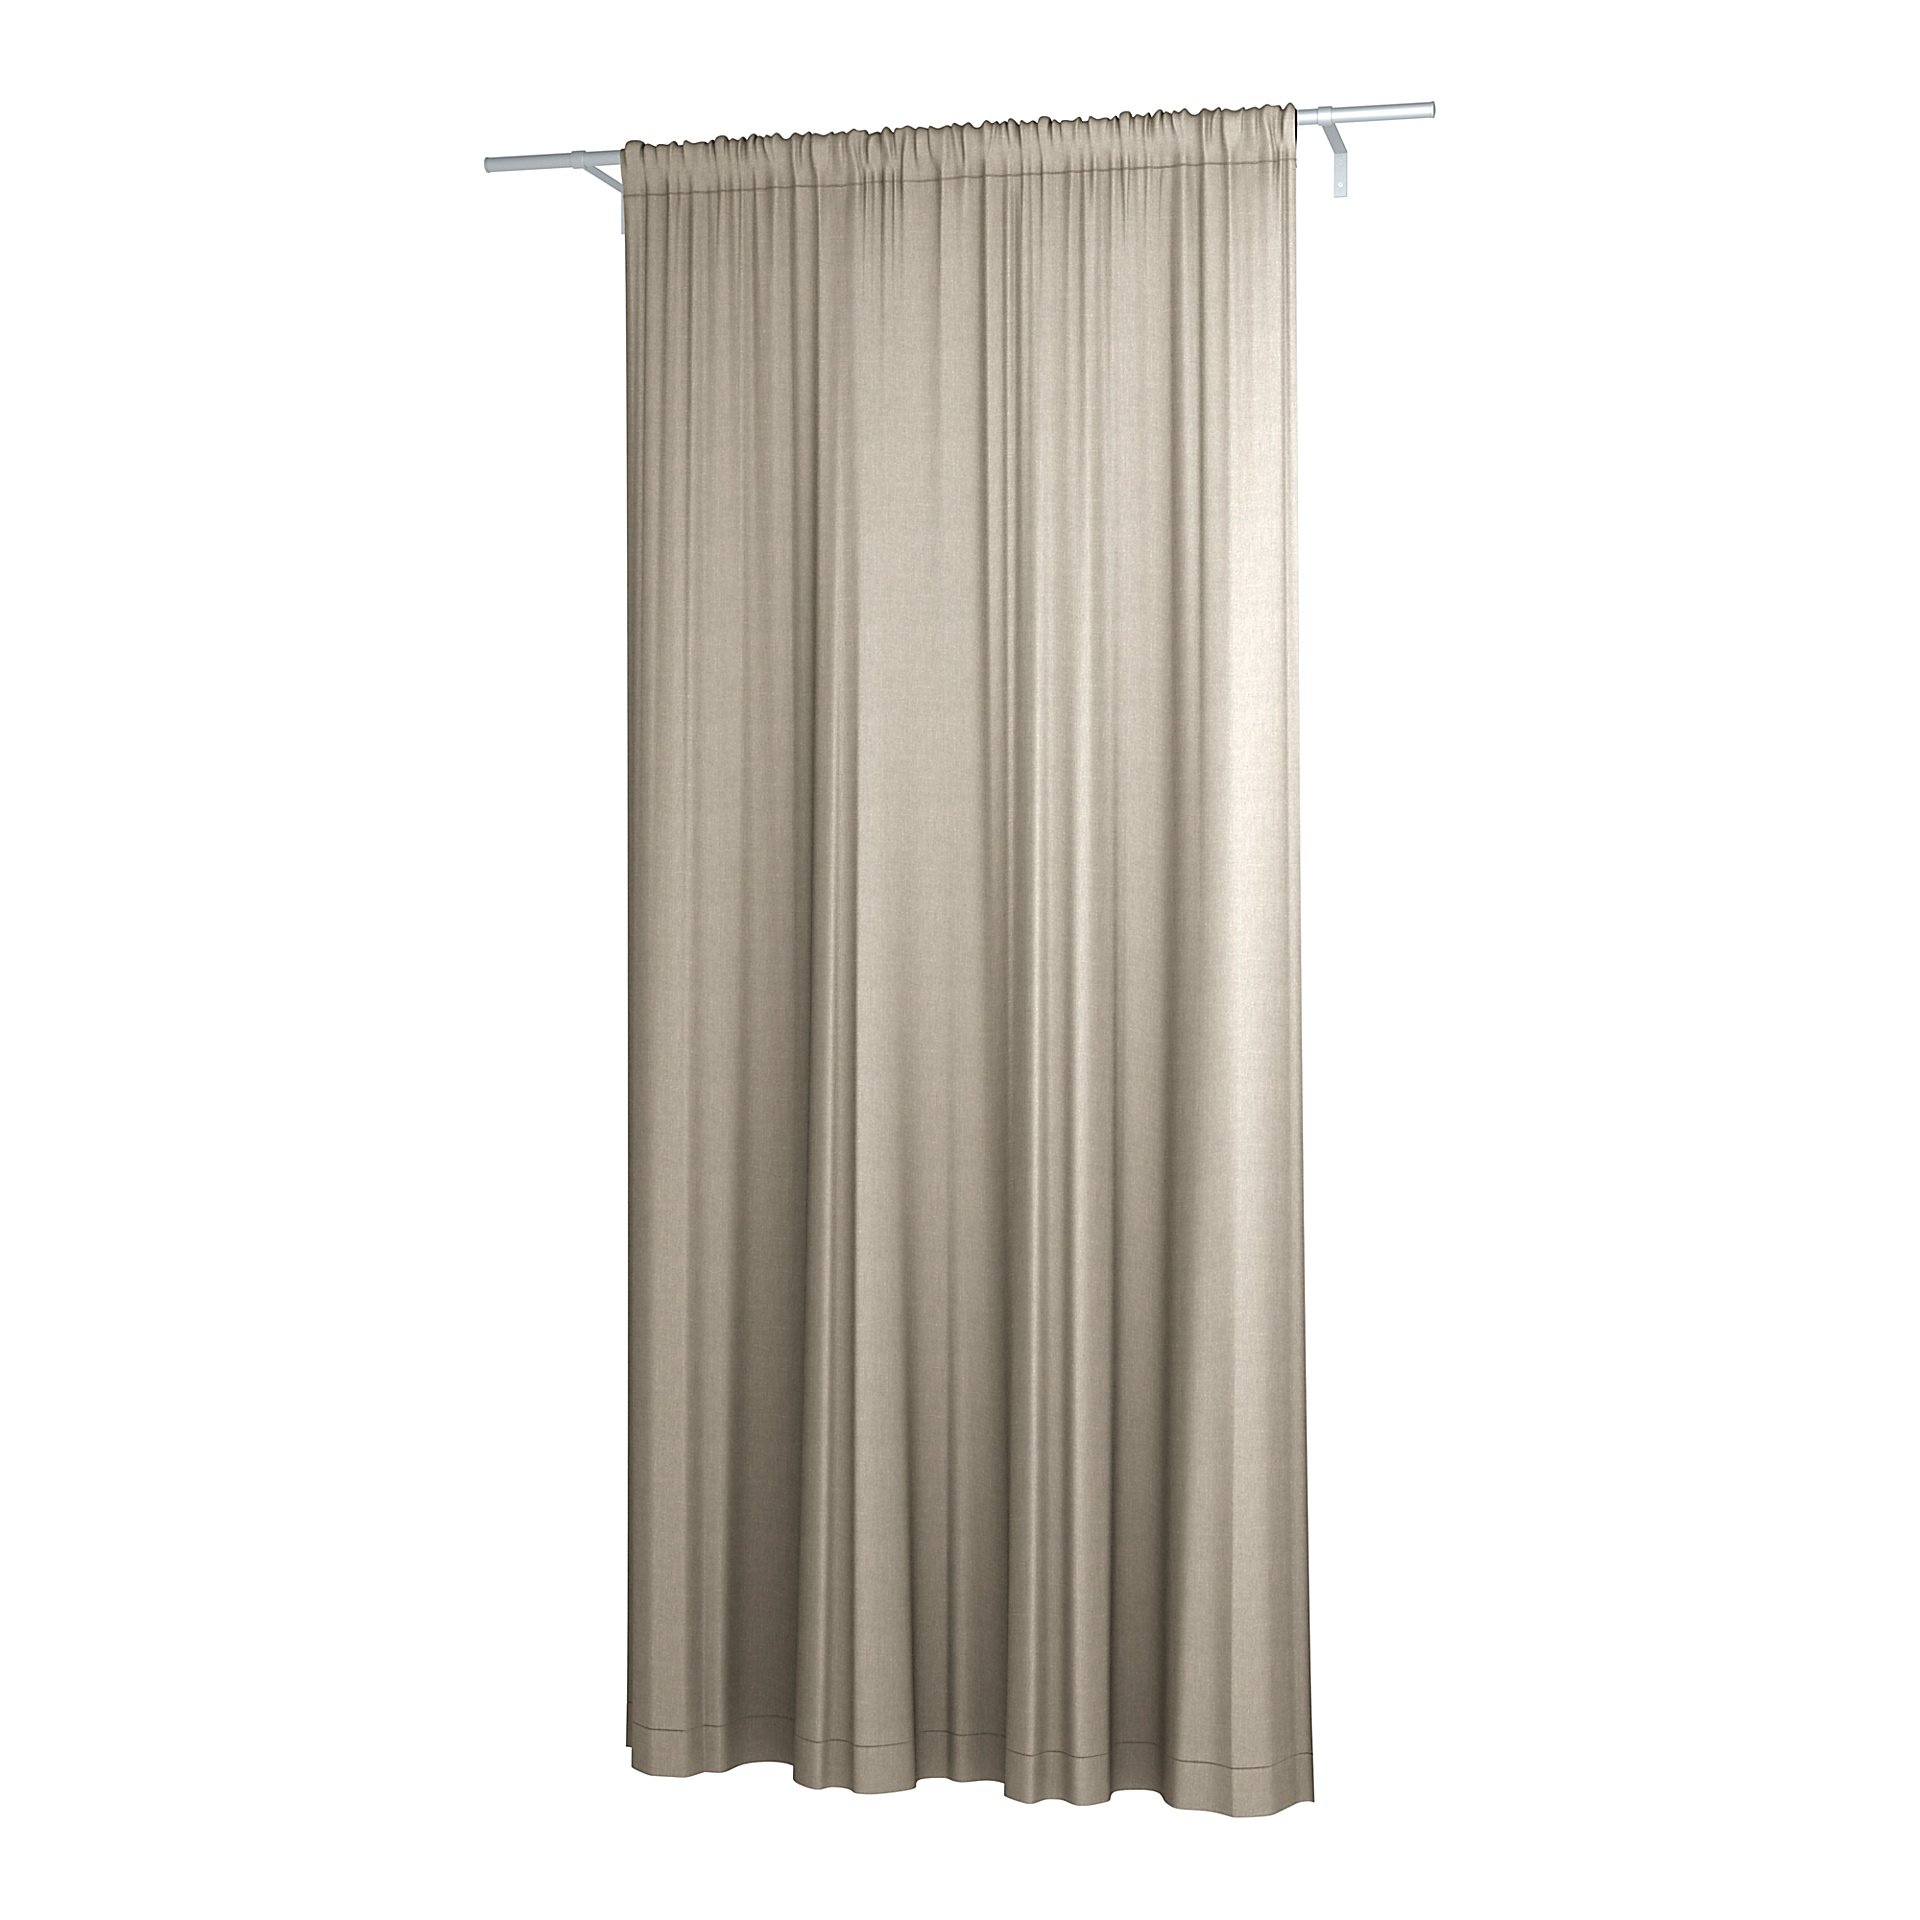 Double Width Curtain Panel with Tunnel/Creaseband, 300 cm, Natural, Linen - Bemz